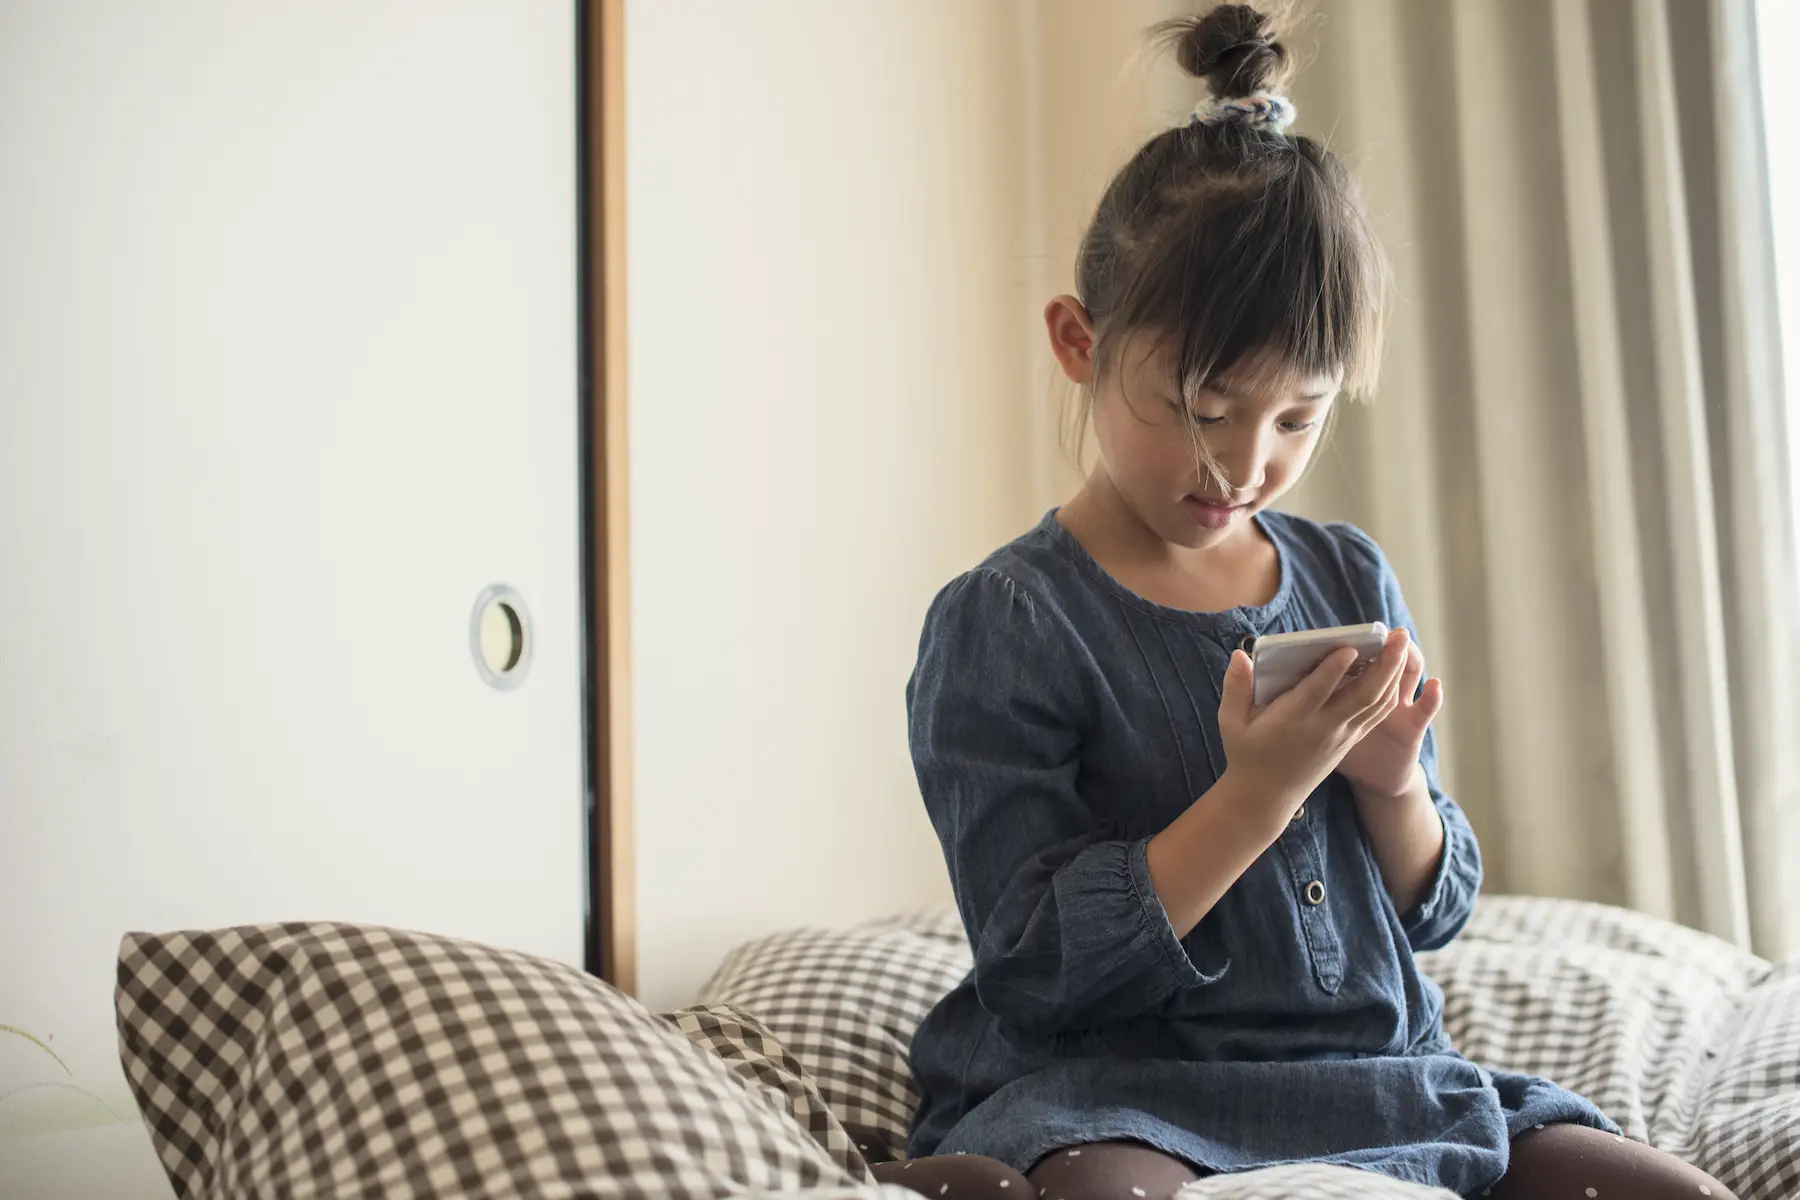 A little girl with bangs and hair in a bun sits on a bed playing with a smartphone